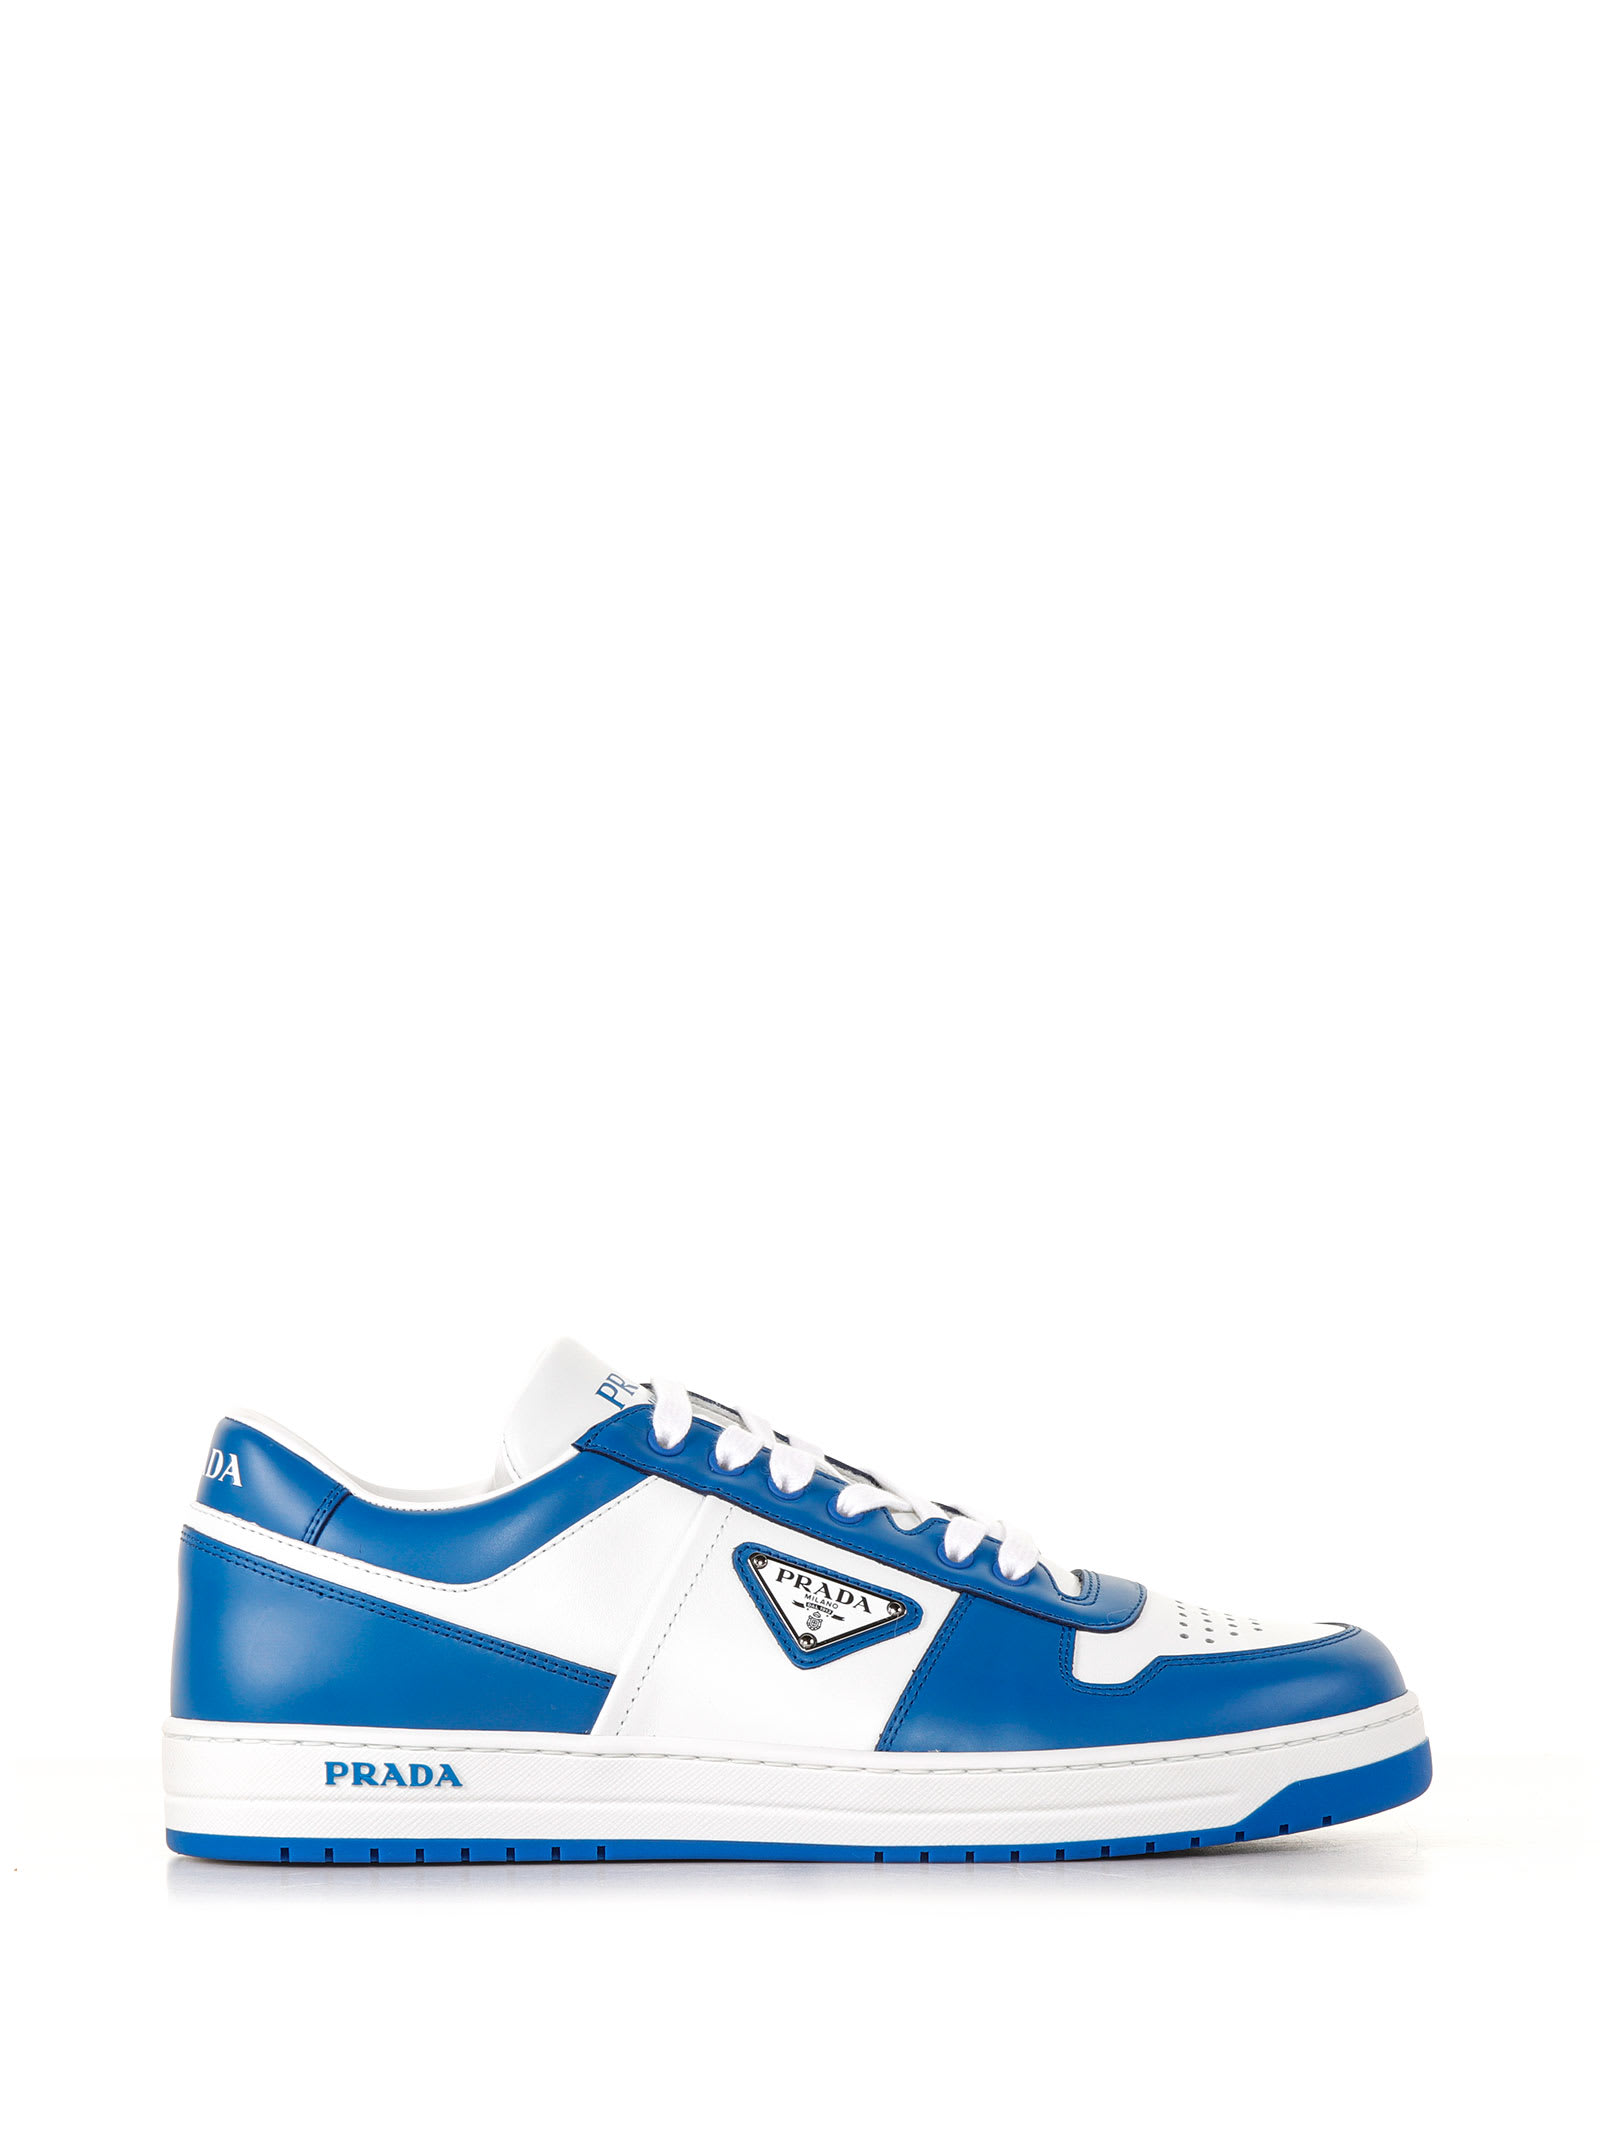 PRADA DOWNTOWN SNEAKERS IN BRUSHED LEATHER